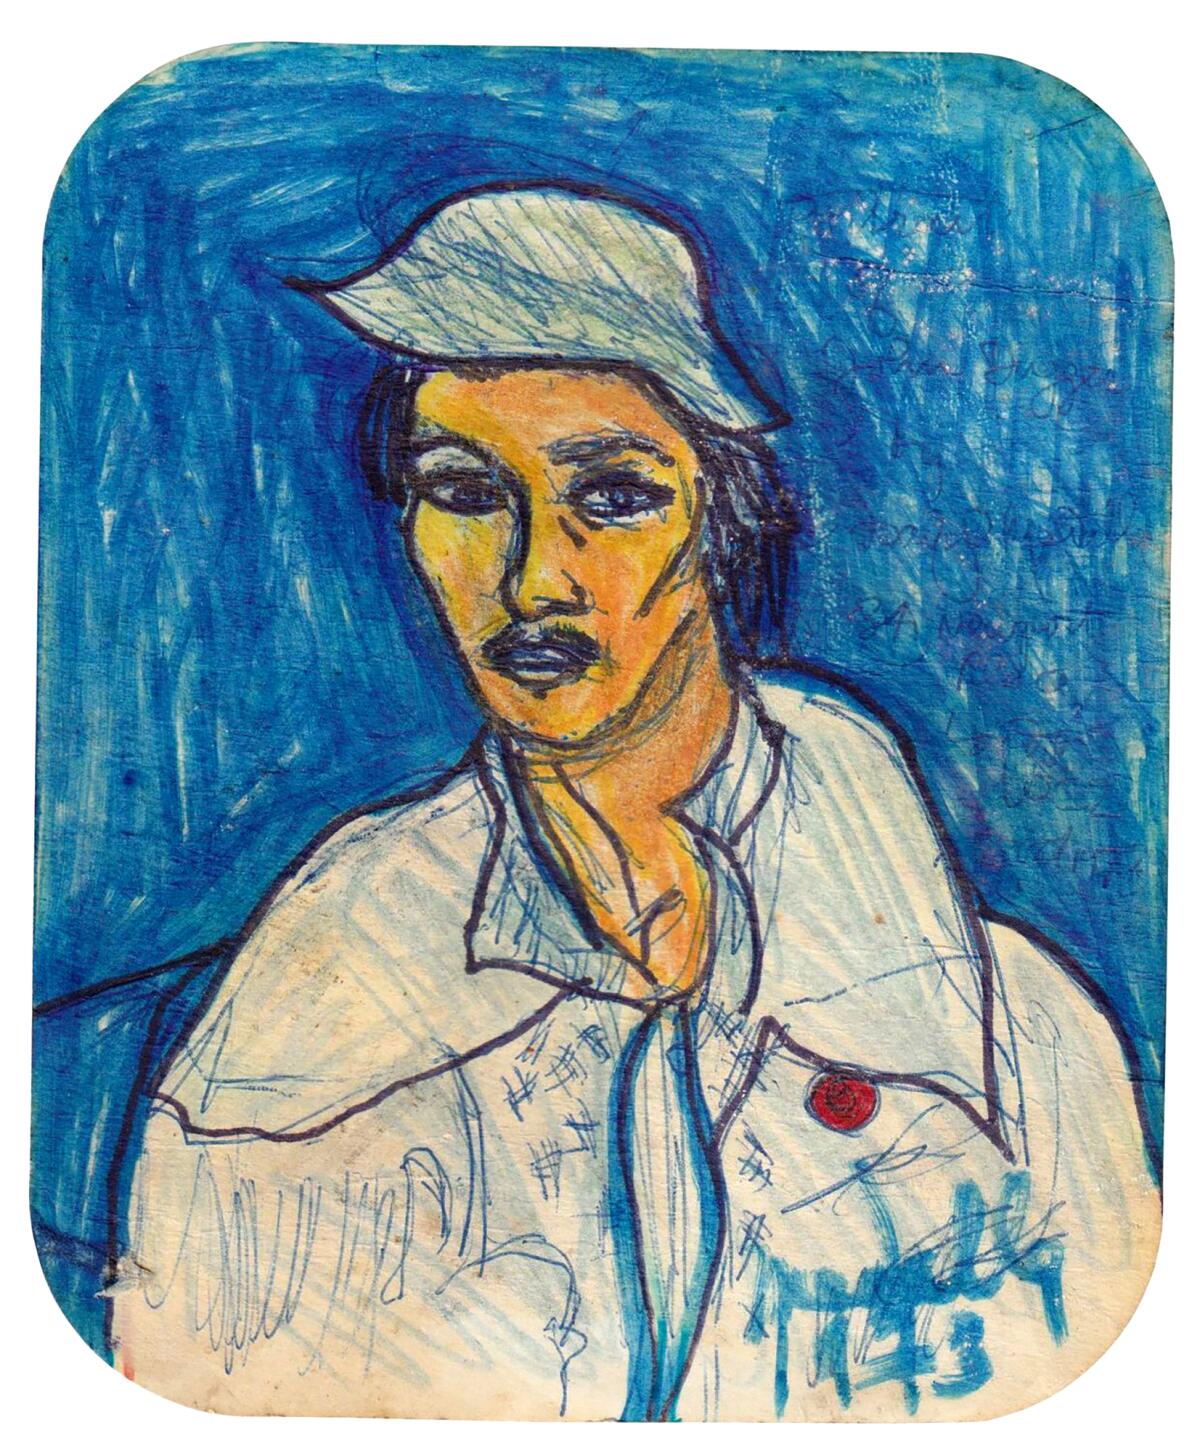 A sketched portrait of a person in a hat against a blue background